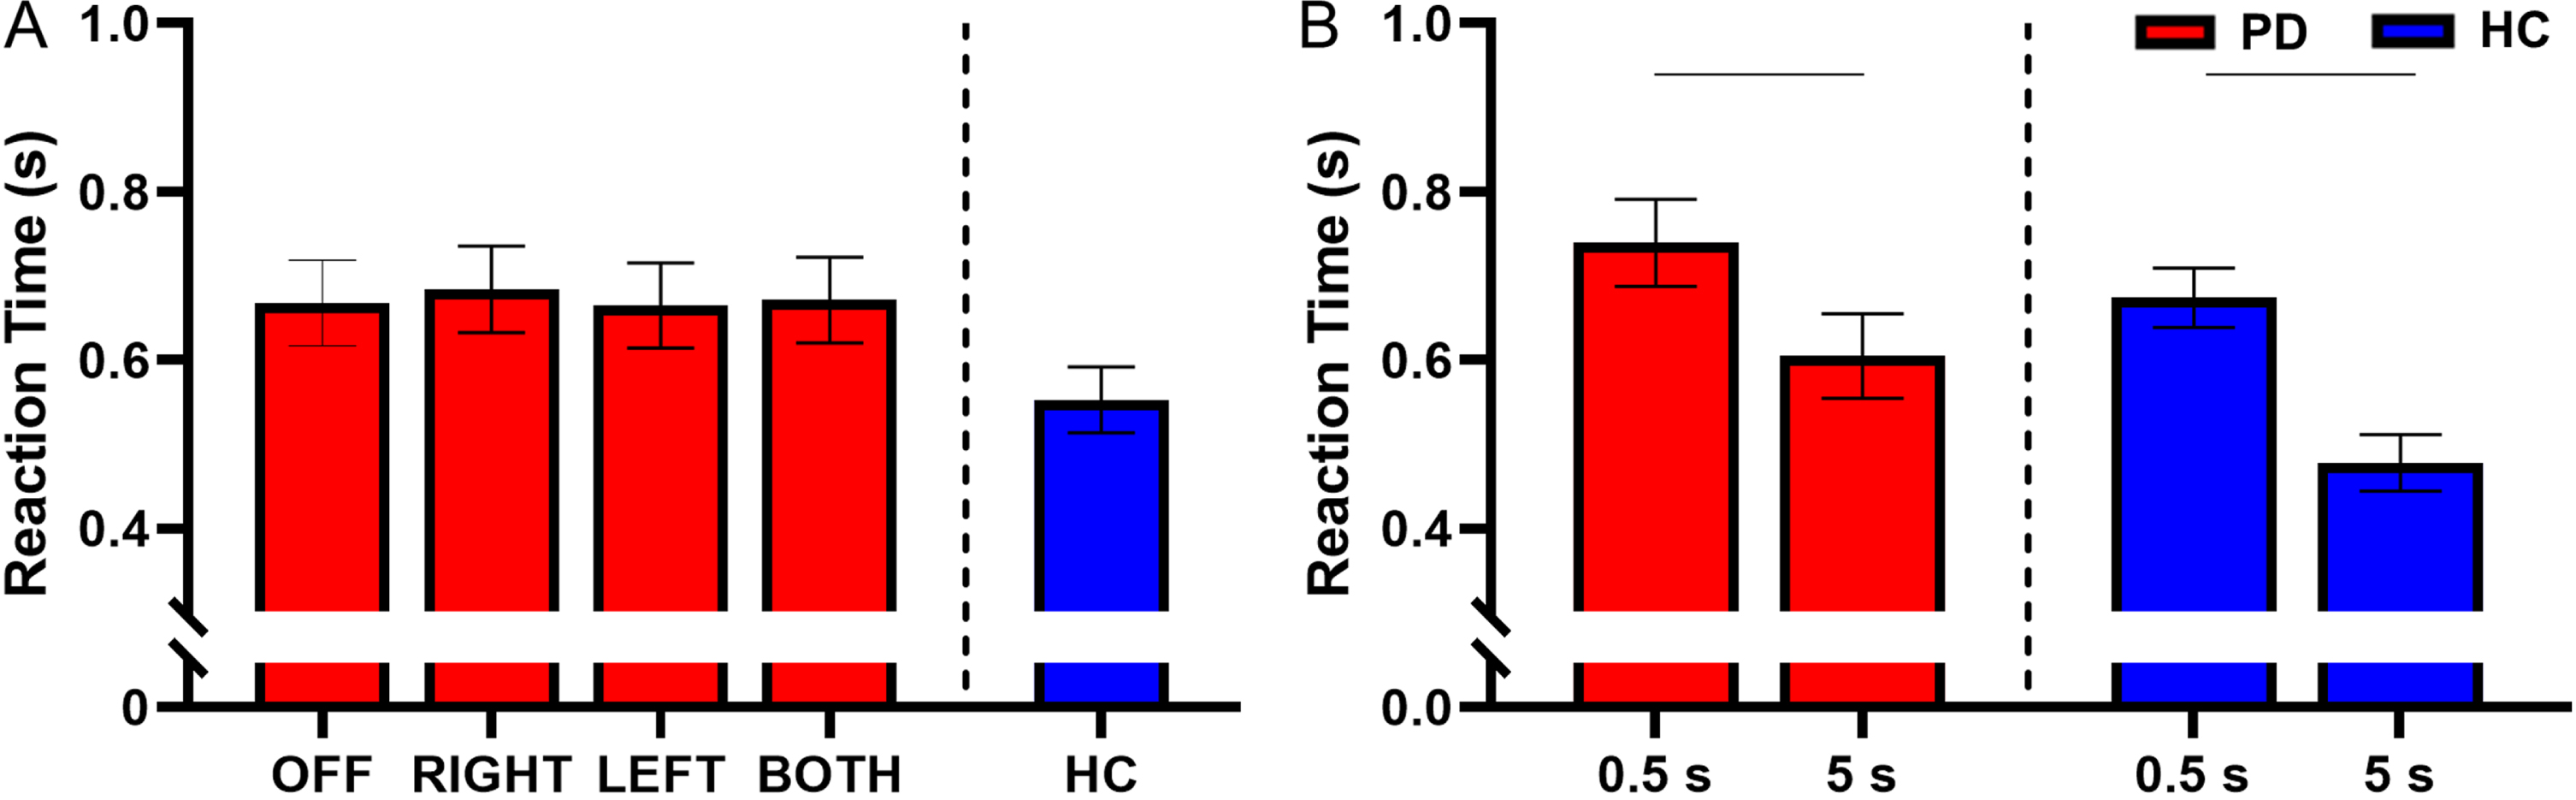 A) Estimated mean (±standard error) of reaction time for both delays for DBS-OFF, RIGHT, LEFT, BOTH, and HC (left to right). Stimulation condition had no effect on reaction time. B) The effect of retention delay on reaction time in the participants with PD and HC. Reaction time was significantly longer during the 0.5 s delay relative to the 5 s delay in the participants with PD (p < 0.001) and HC (p < 0.001). The bars above the graph denote the significant differences in reaction time between the short and long retention delays.